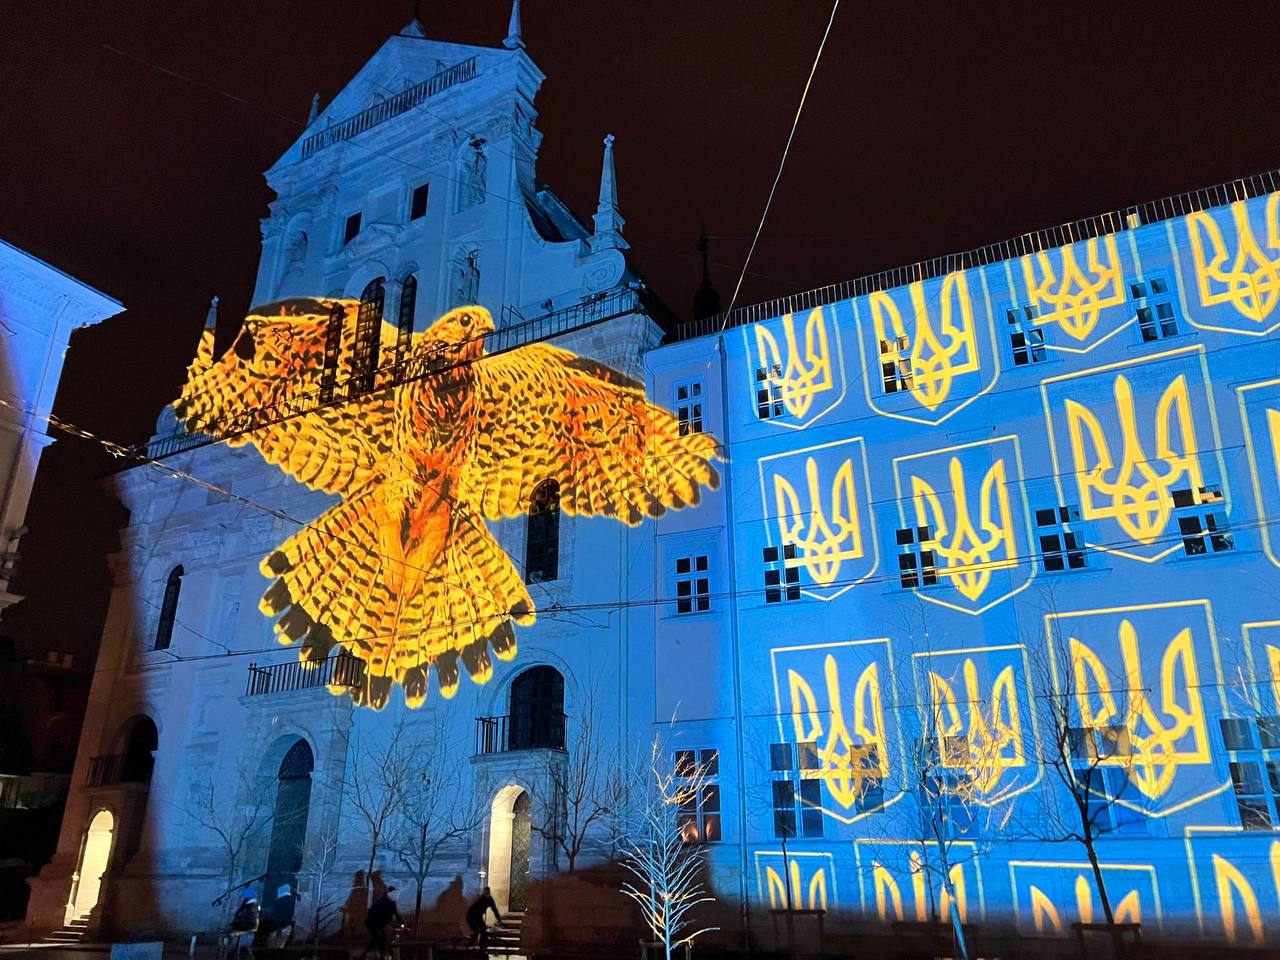 The artist from Switzerland, Gerry Hofstetter, lit up the buildings in Lviv